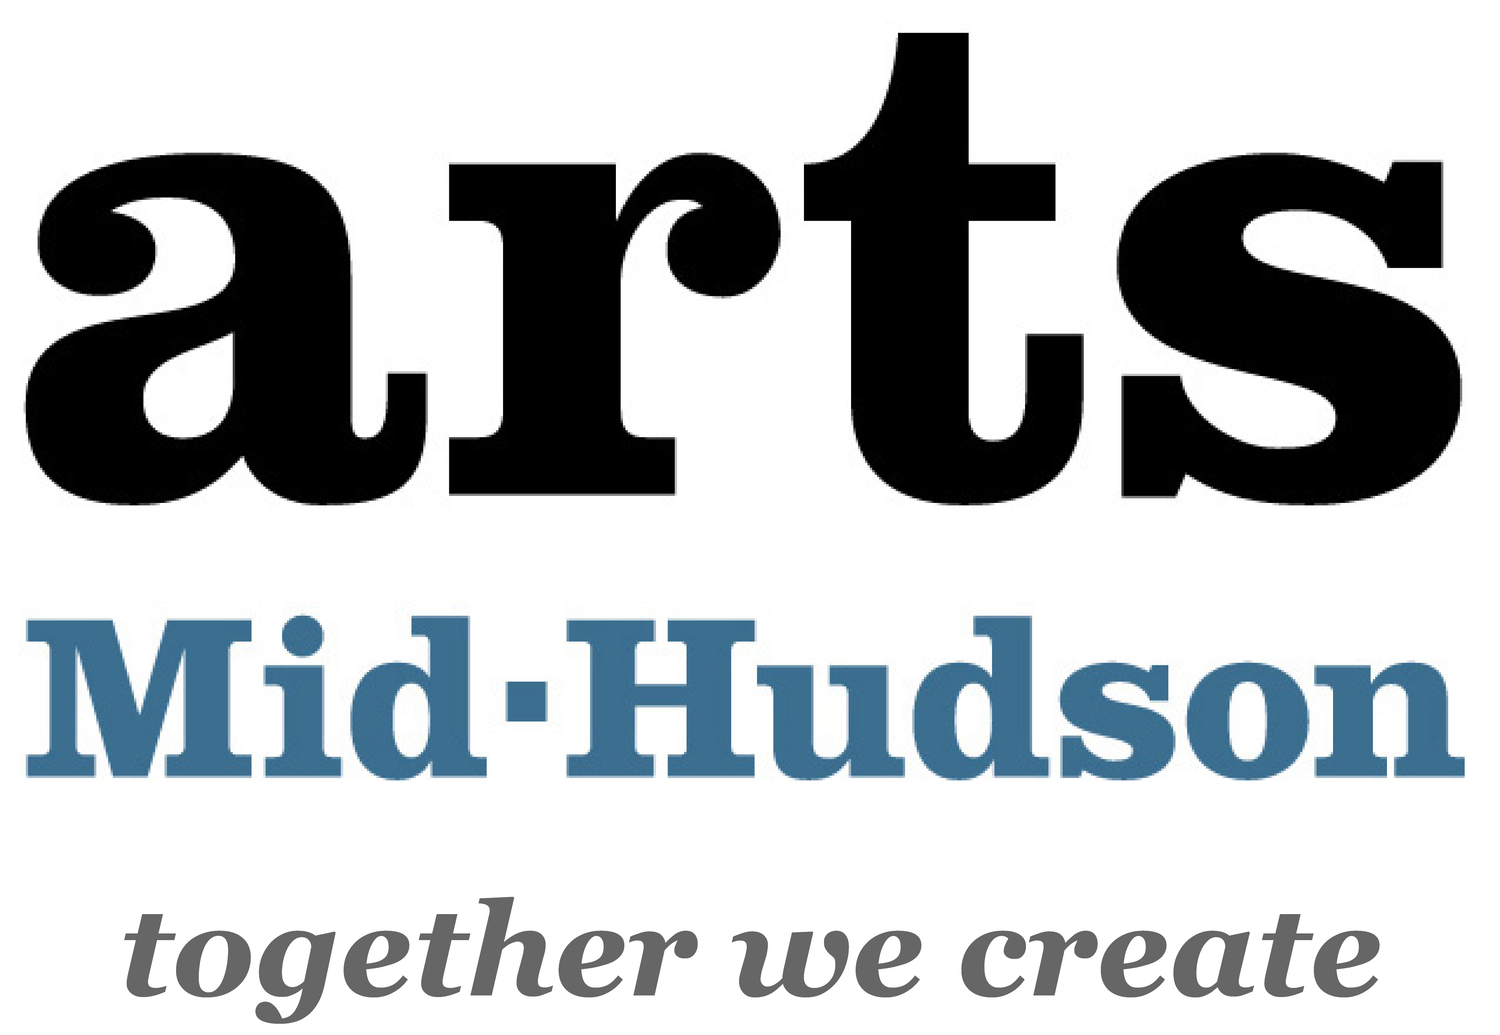  This project is made possible in part through support from the County of Ulster’s Ulster County Cultural Services &amp; Promotion Fund administrated by Arts Mid-Hudson. For more information on programs, services, grants and opportunities, or to sign